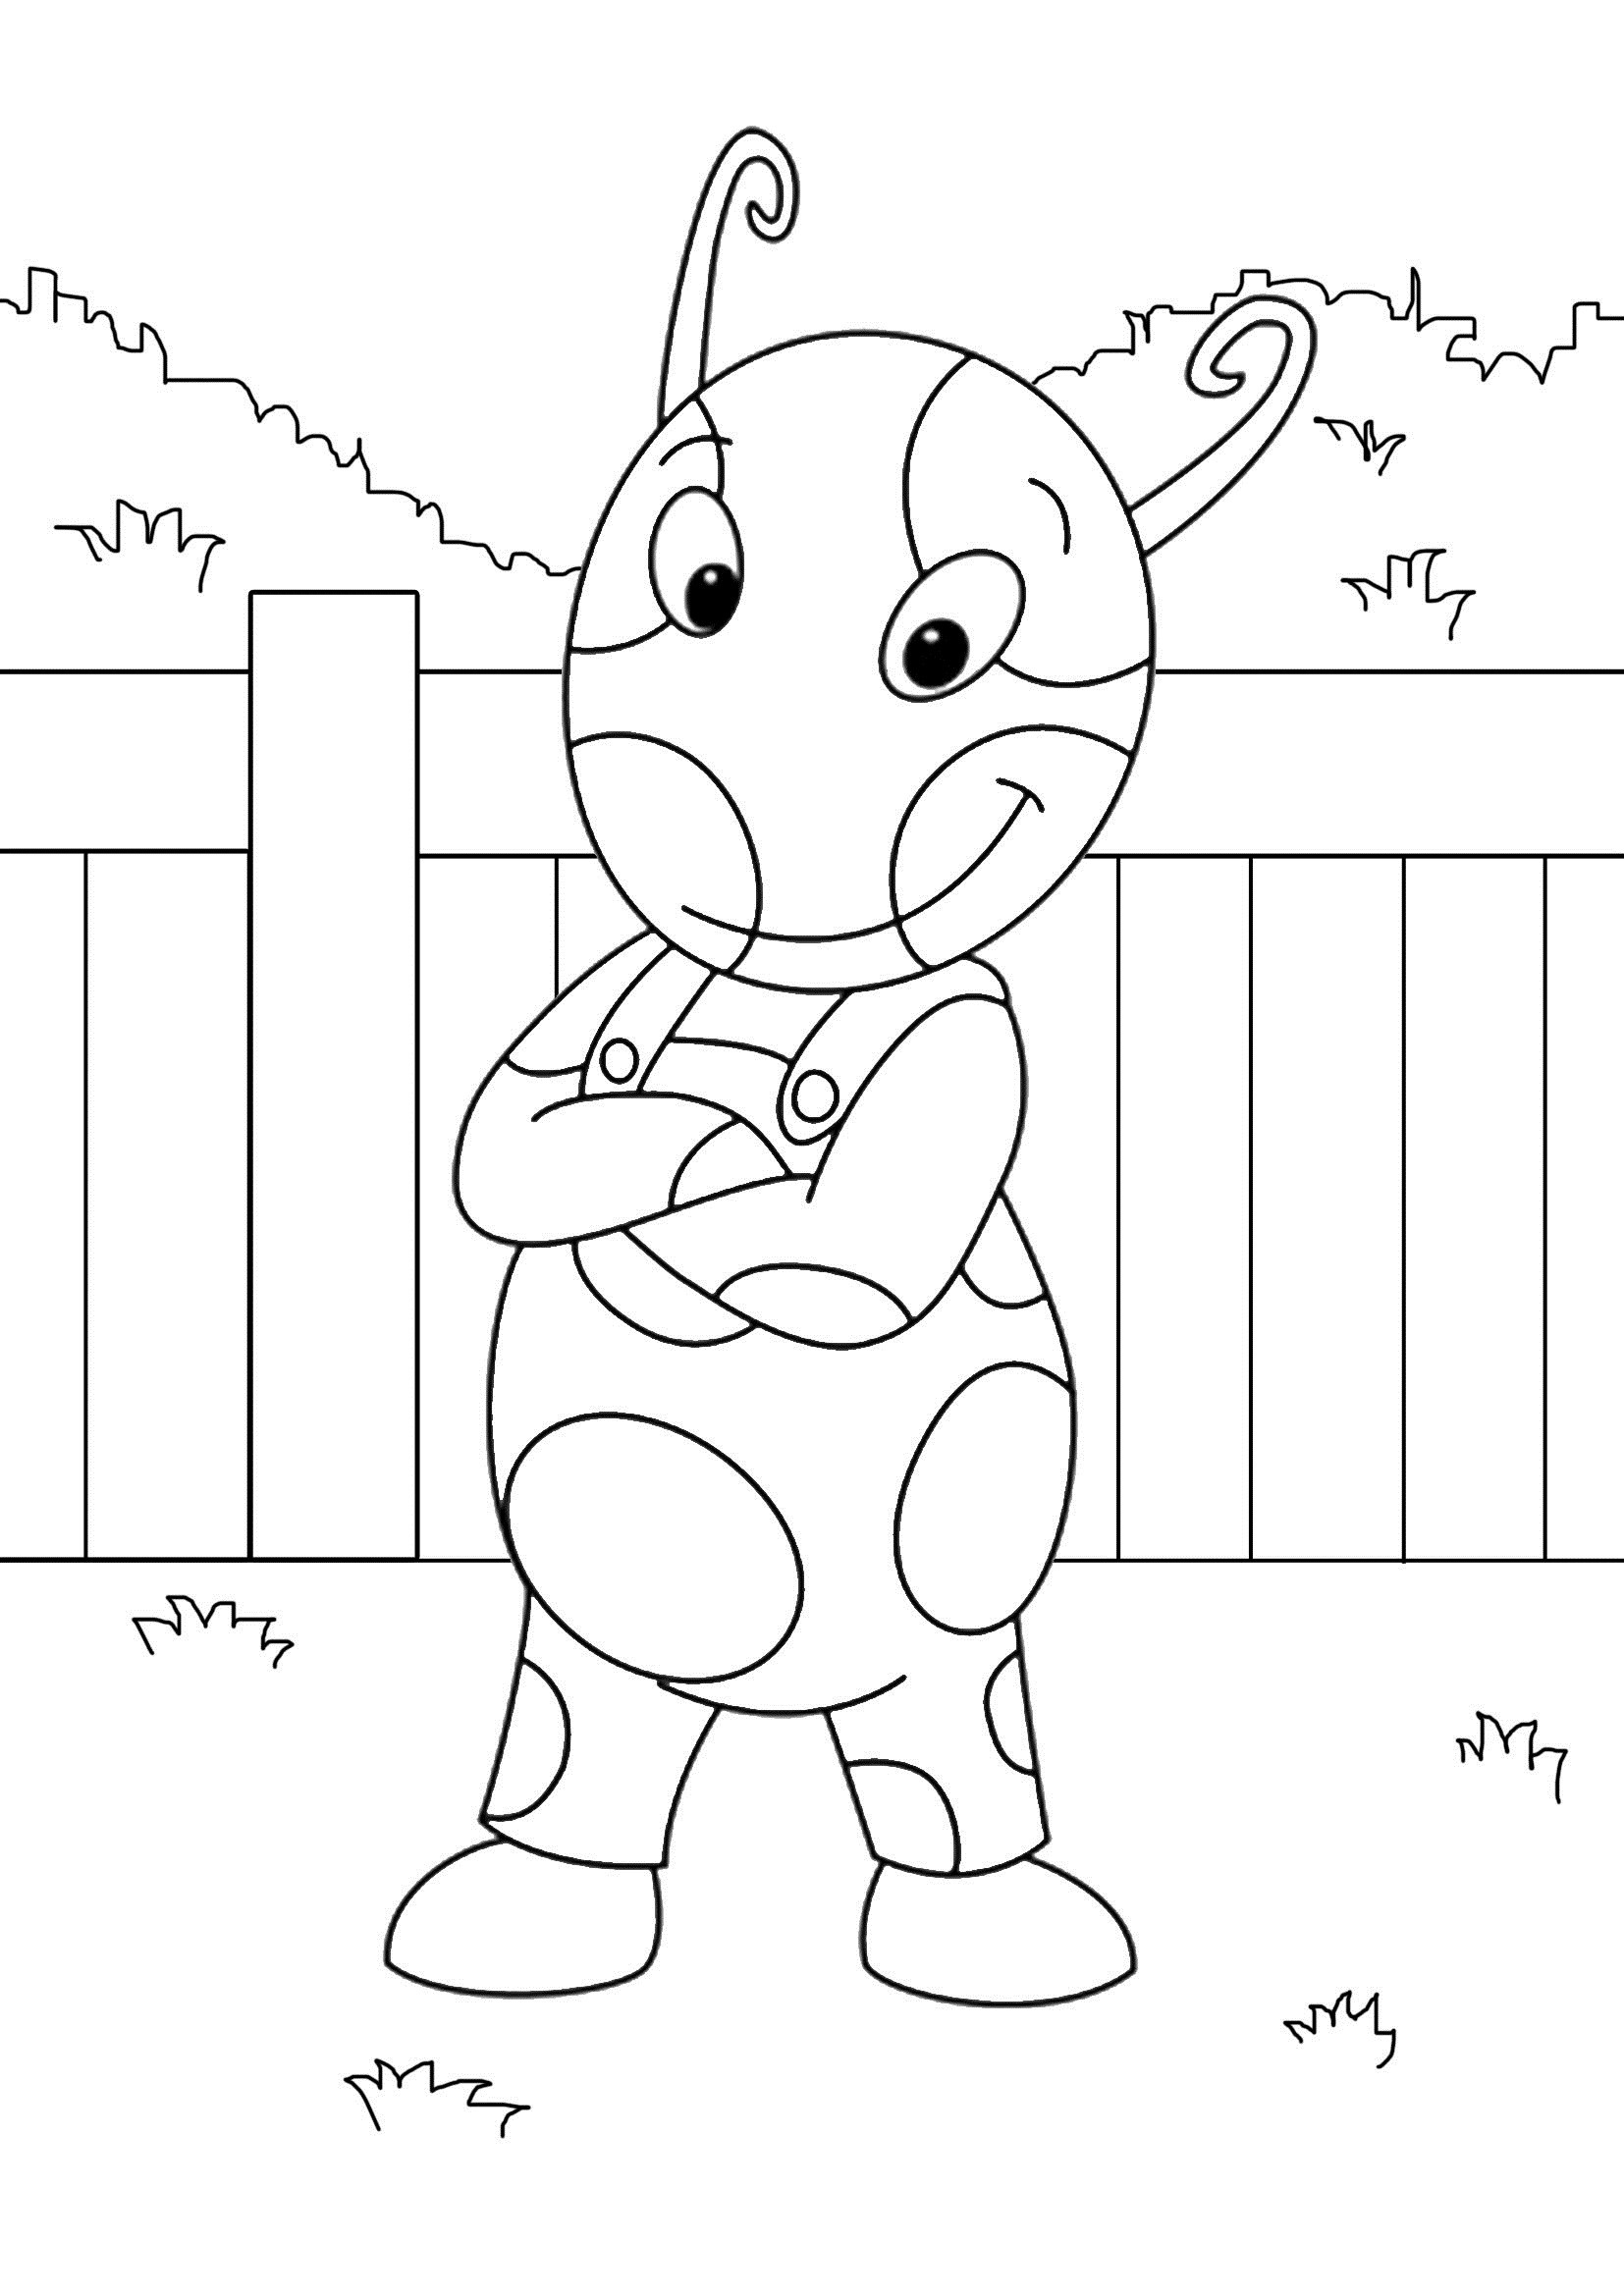 Kids Coloring Print
 Free Printable Backyardigans Coloring Pages For Kids